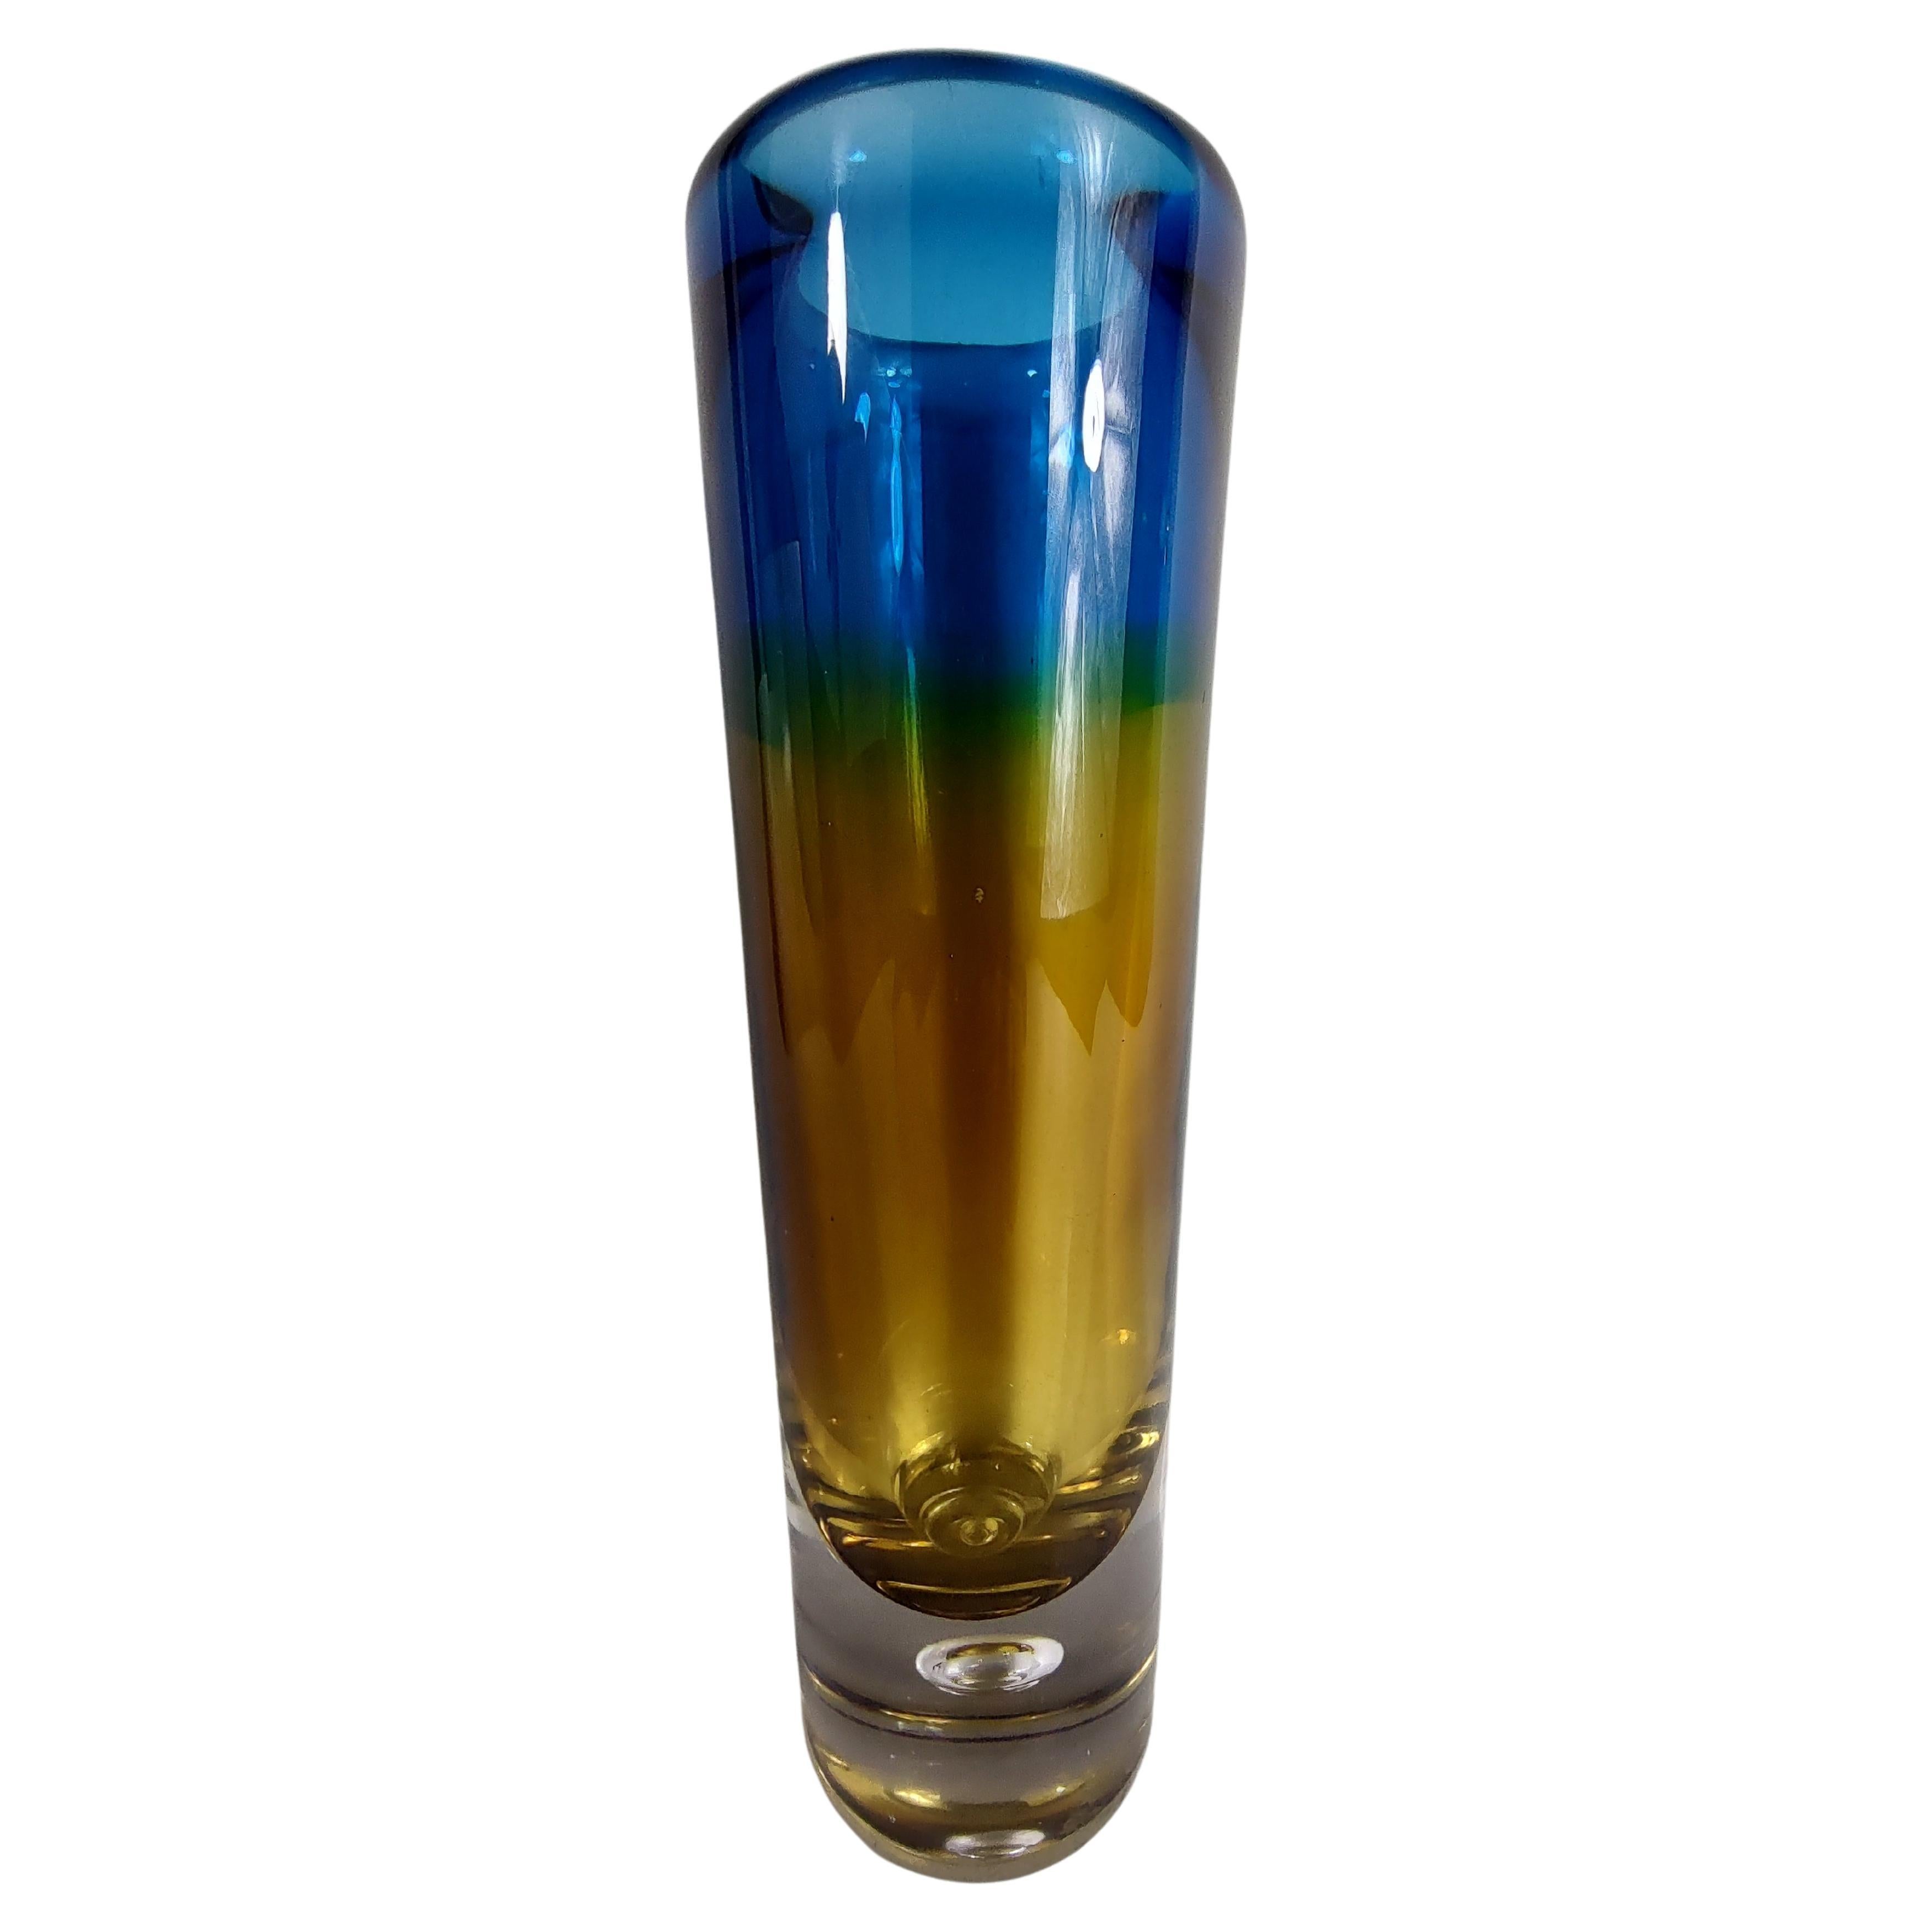 Mid-20th Century Mid-Century Modern Art Glass Vase by Vicke Lindstrand for Kosta Boda # 41890 For Sale